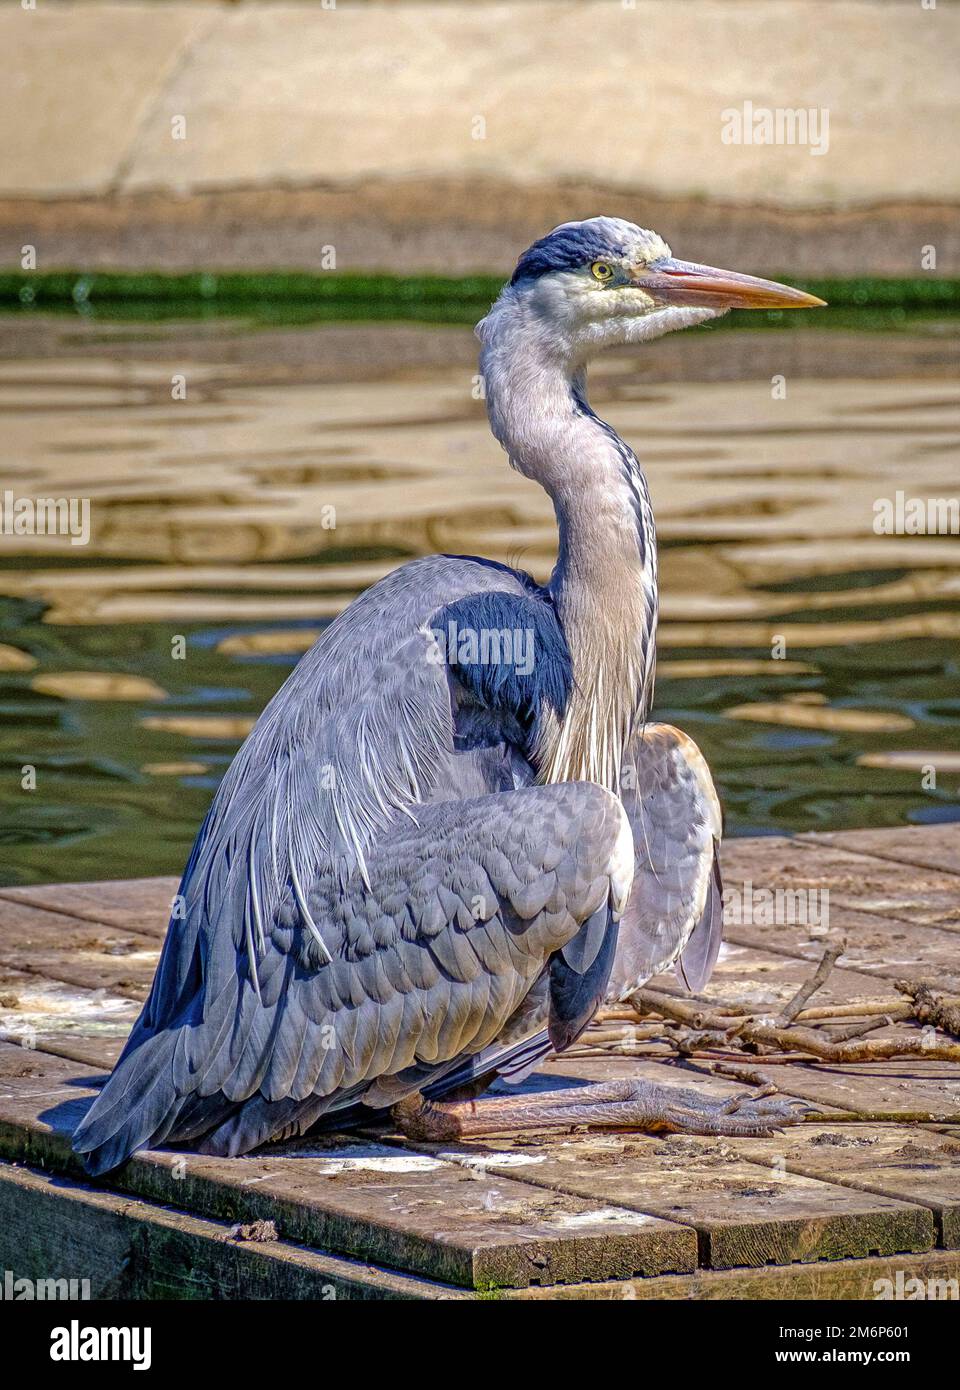 Adult grey heron with extended neck and long sharply pointed beak sits on raft in lake looking for prey. Stock Photo